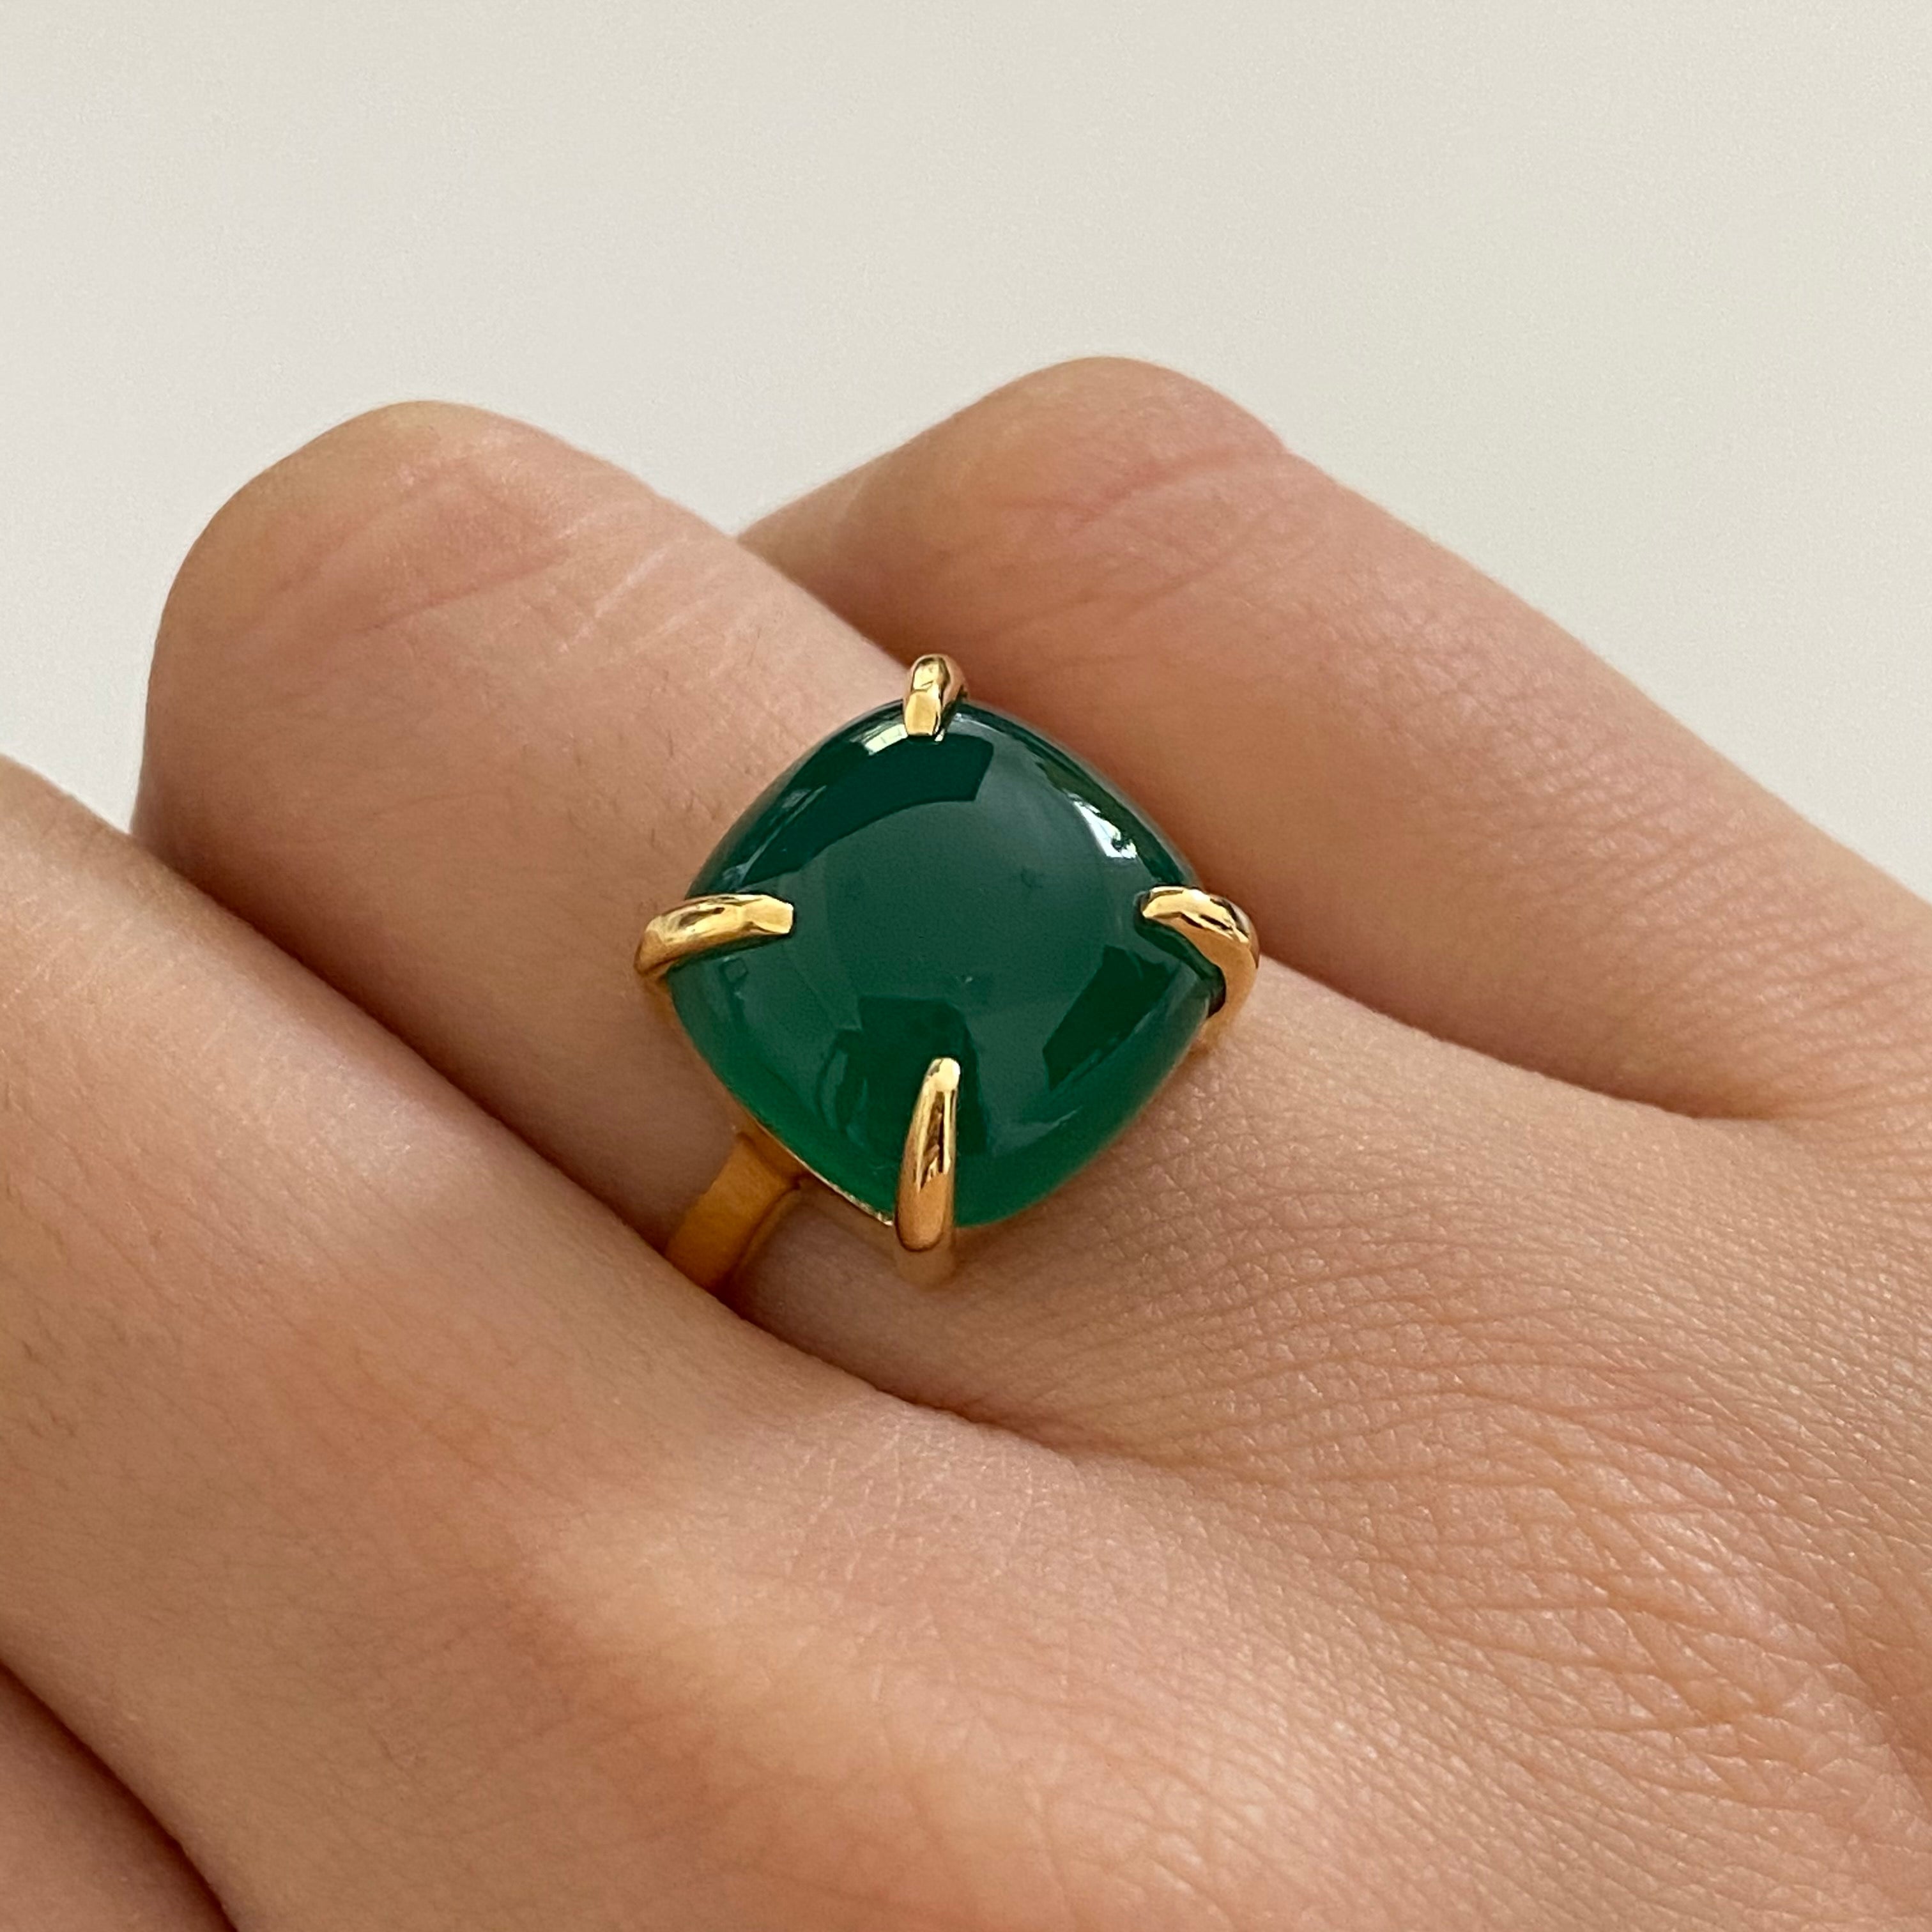 Square Cabochon Green Onyx Ring in Gold Plated Sterling Silver